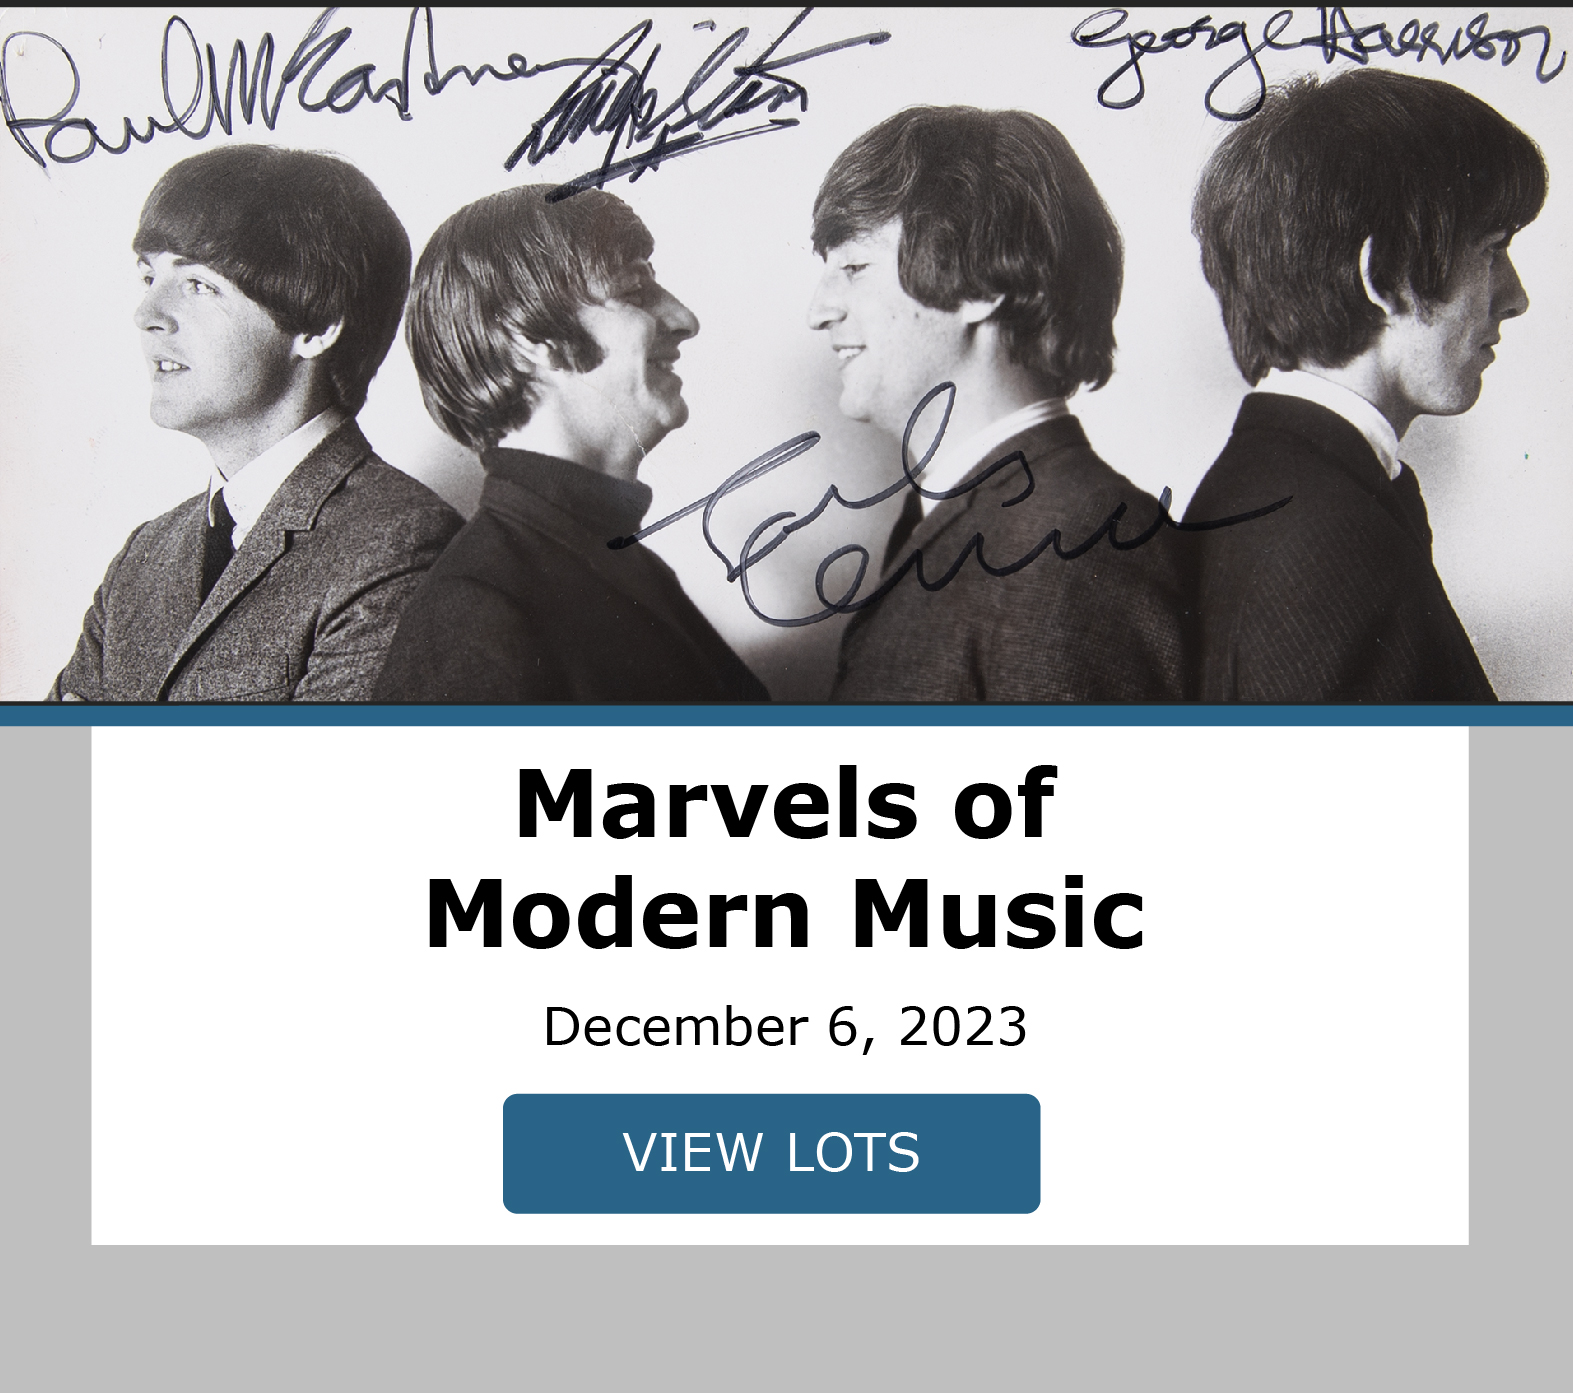 Marvels of Modern Music. Bidding closes December 14. View Lots!